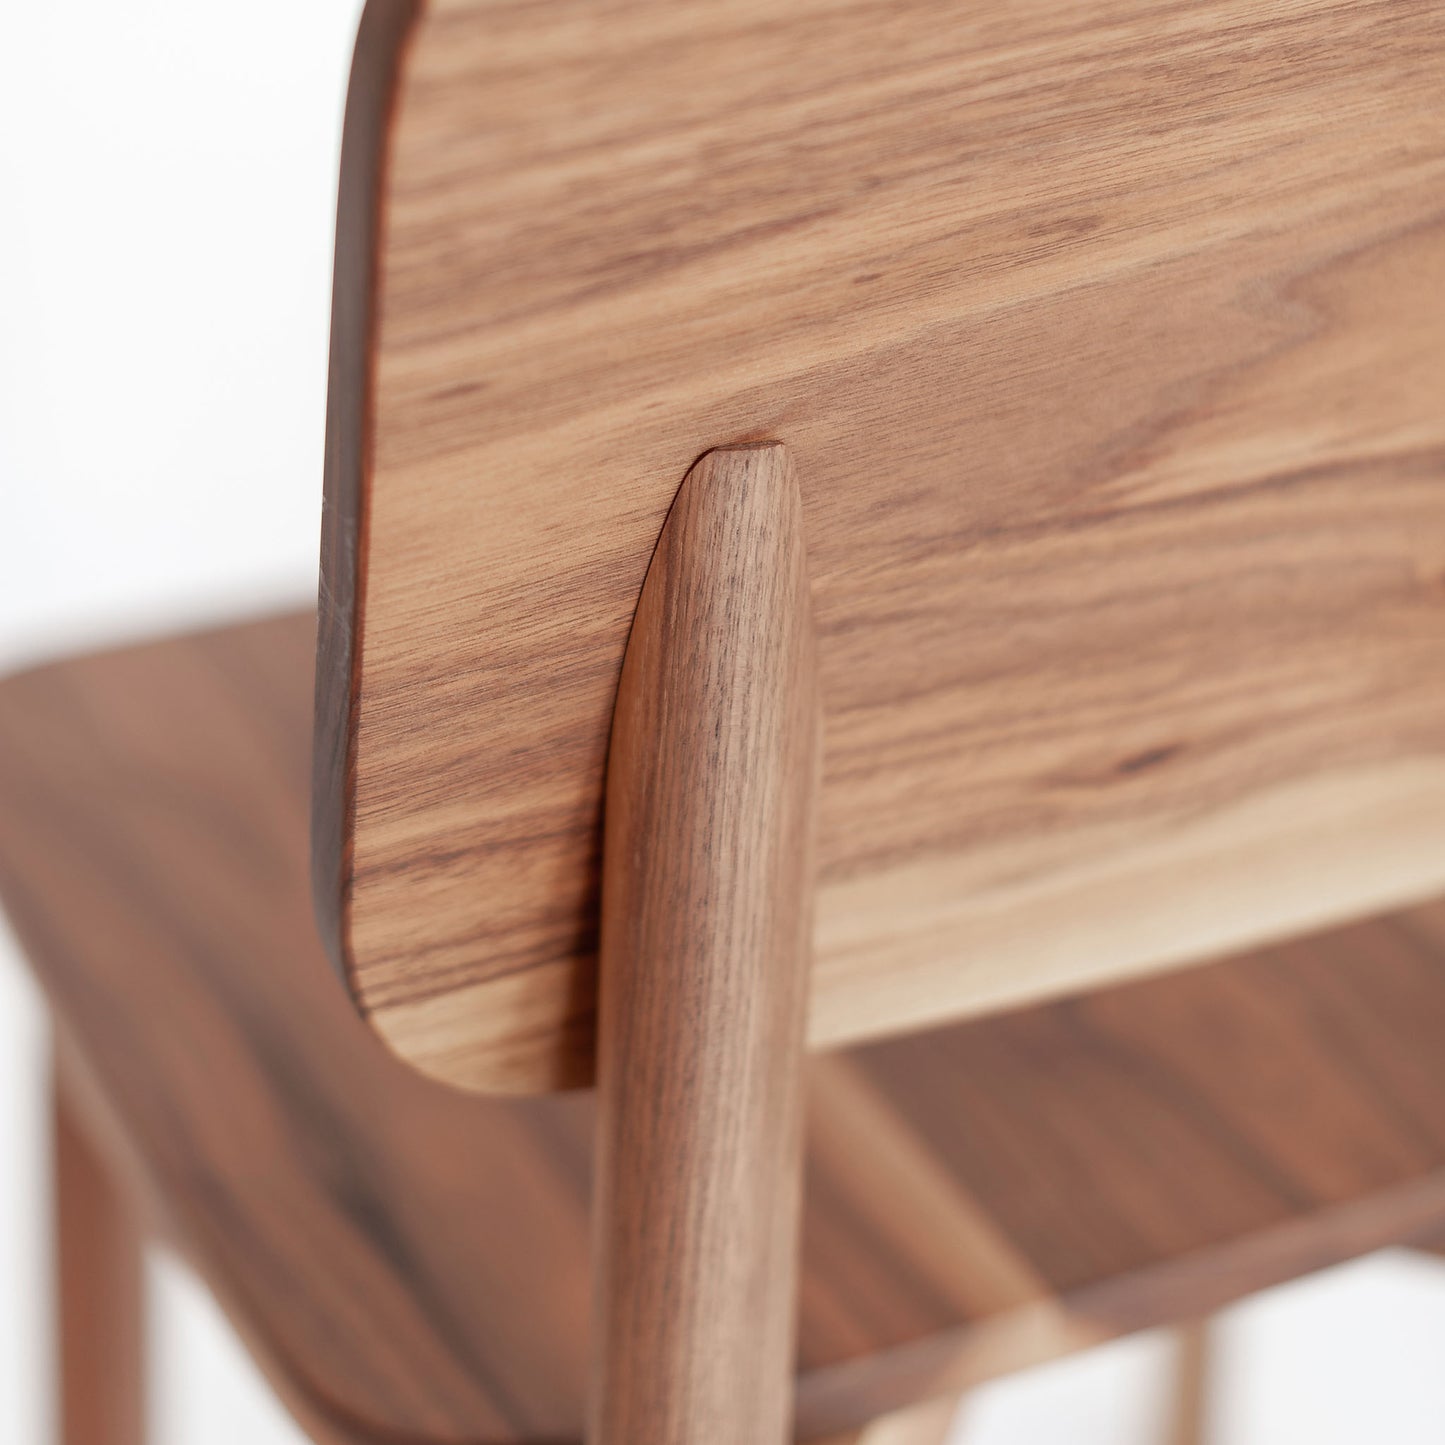 Muhuhu Dining Chair | Solid American Walnut Natural (Ex Display Stock)